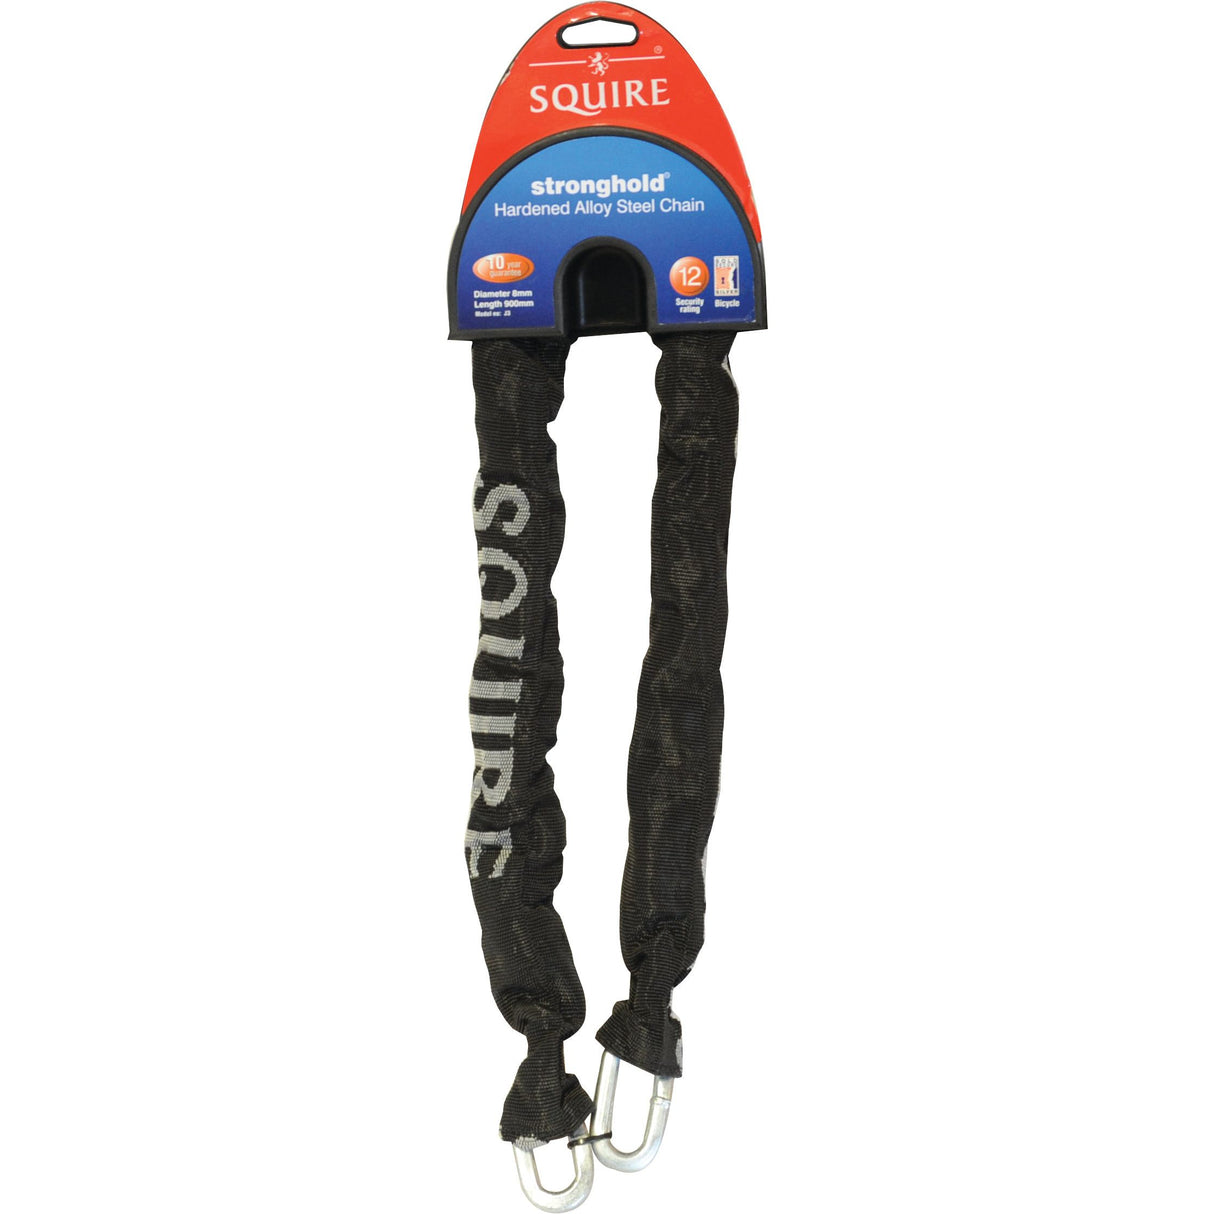 Squire Security Chain - J3, Chain⌀: 8mm (Security rating: 8)
 - S.114340 - Farming Parts